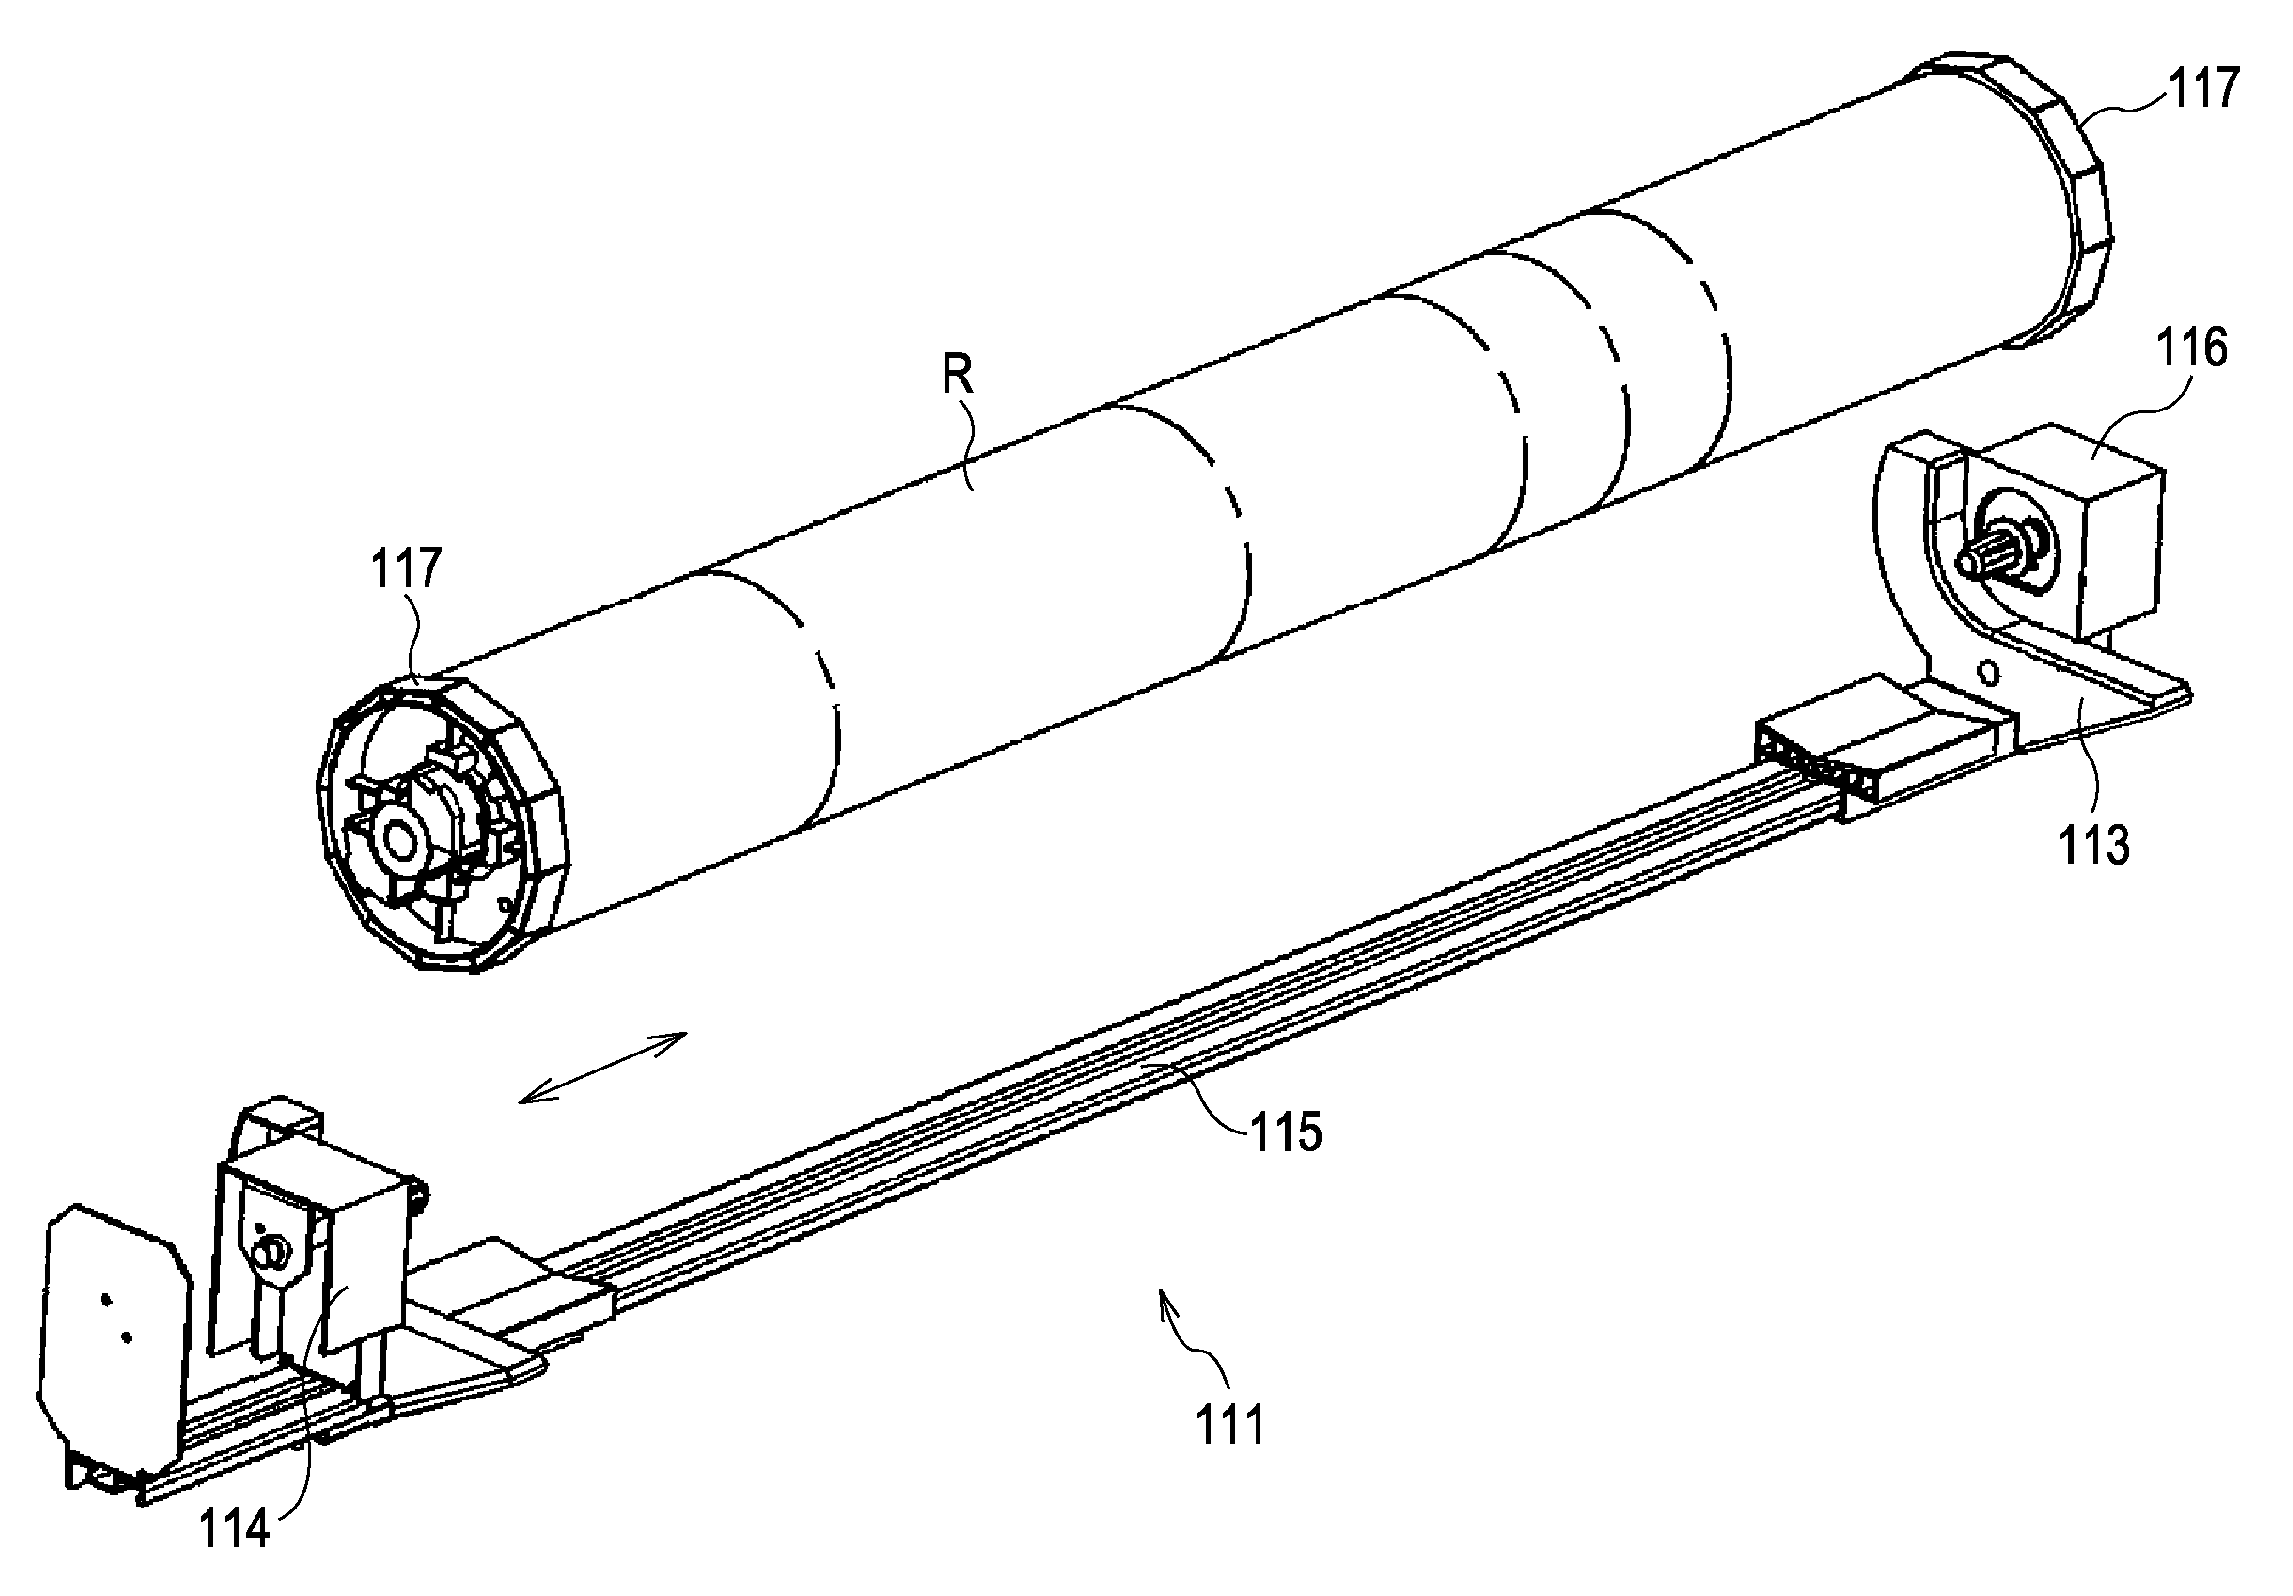 Rolled medium supporting device for supporting both ends of rolled medium and recording apparatus having the rolled medium supporting device